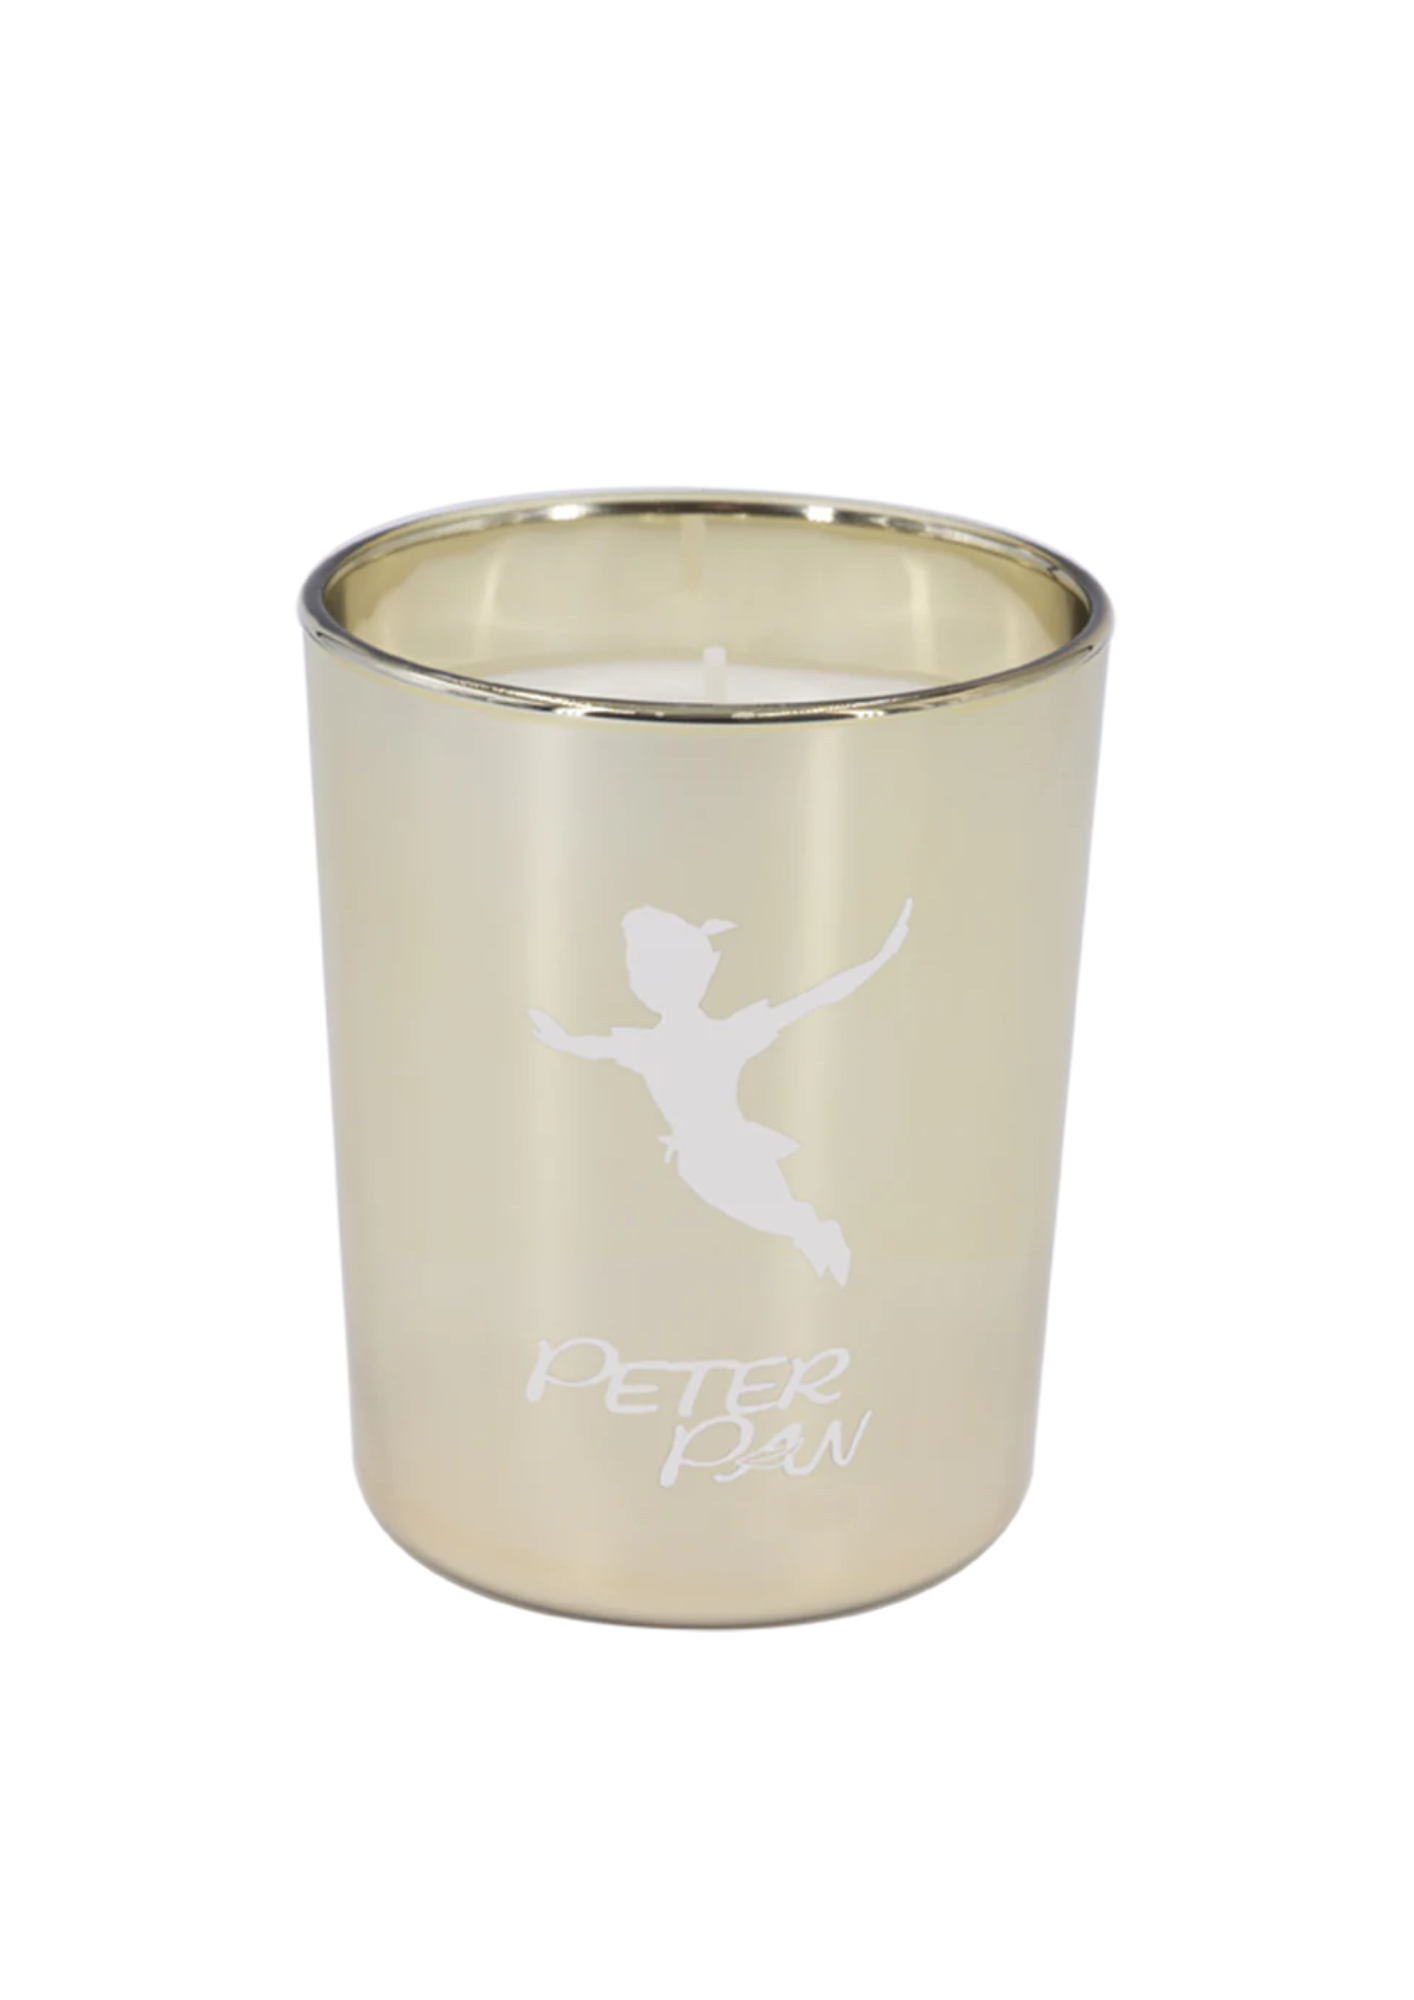 DISNEY PETER PAN SCENTED CANDLE